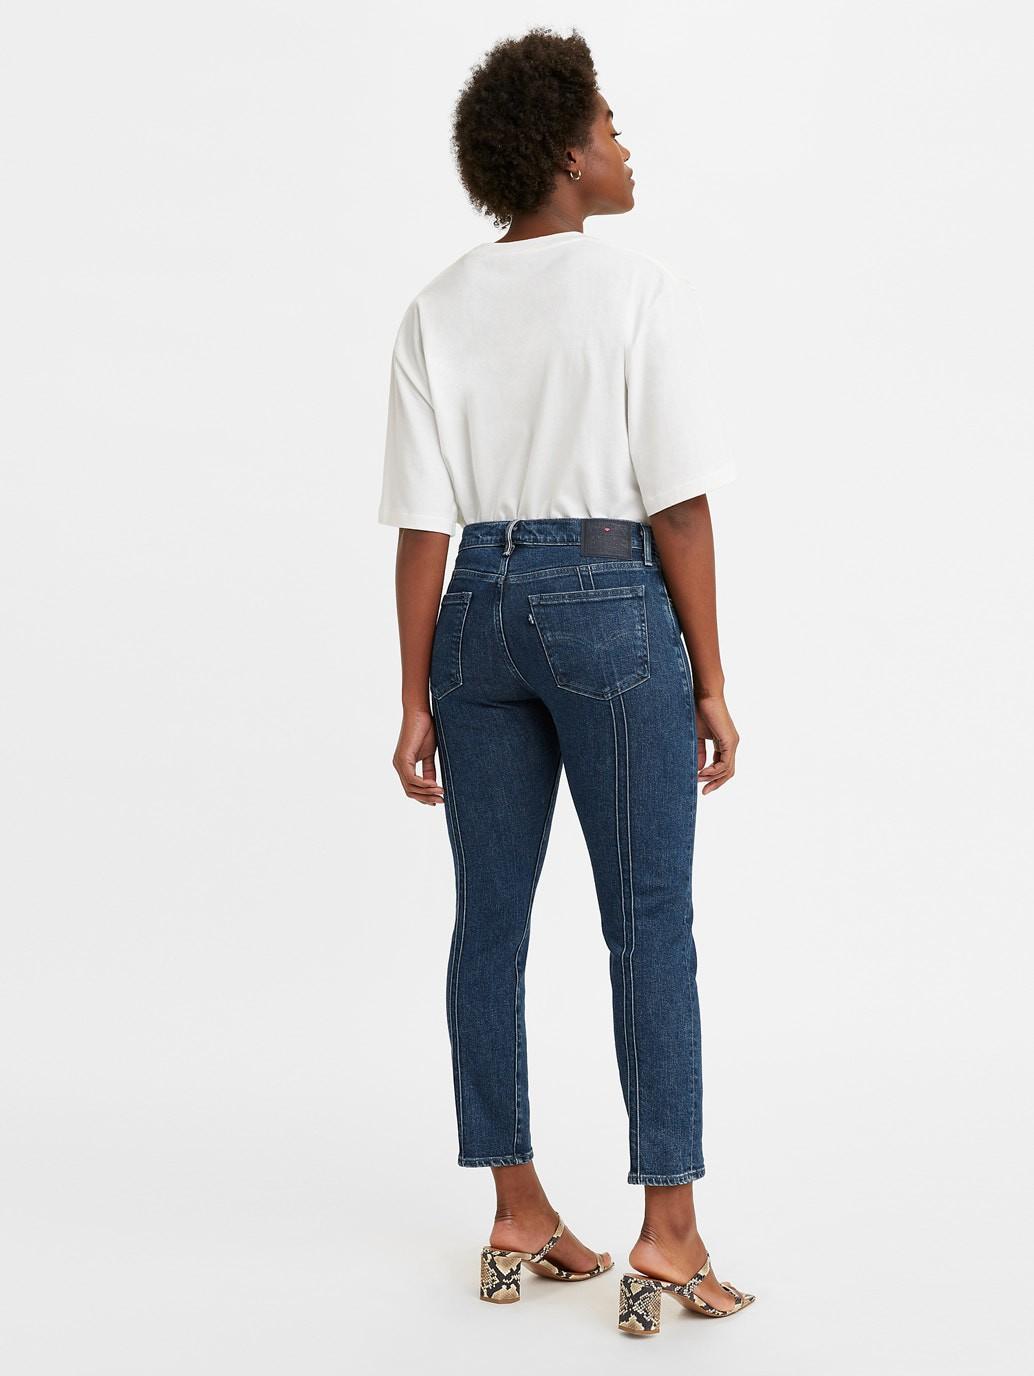 Buy Levi's® Made & Crafted® New Boyfriend Straight Women's Jeans Levi's® Official Online